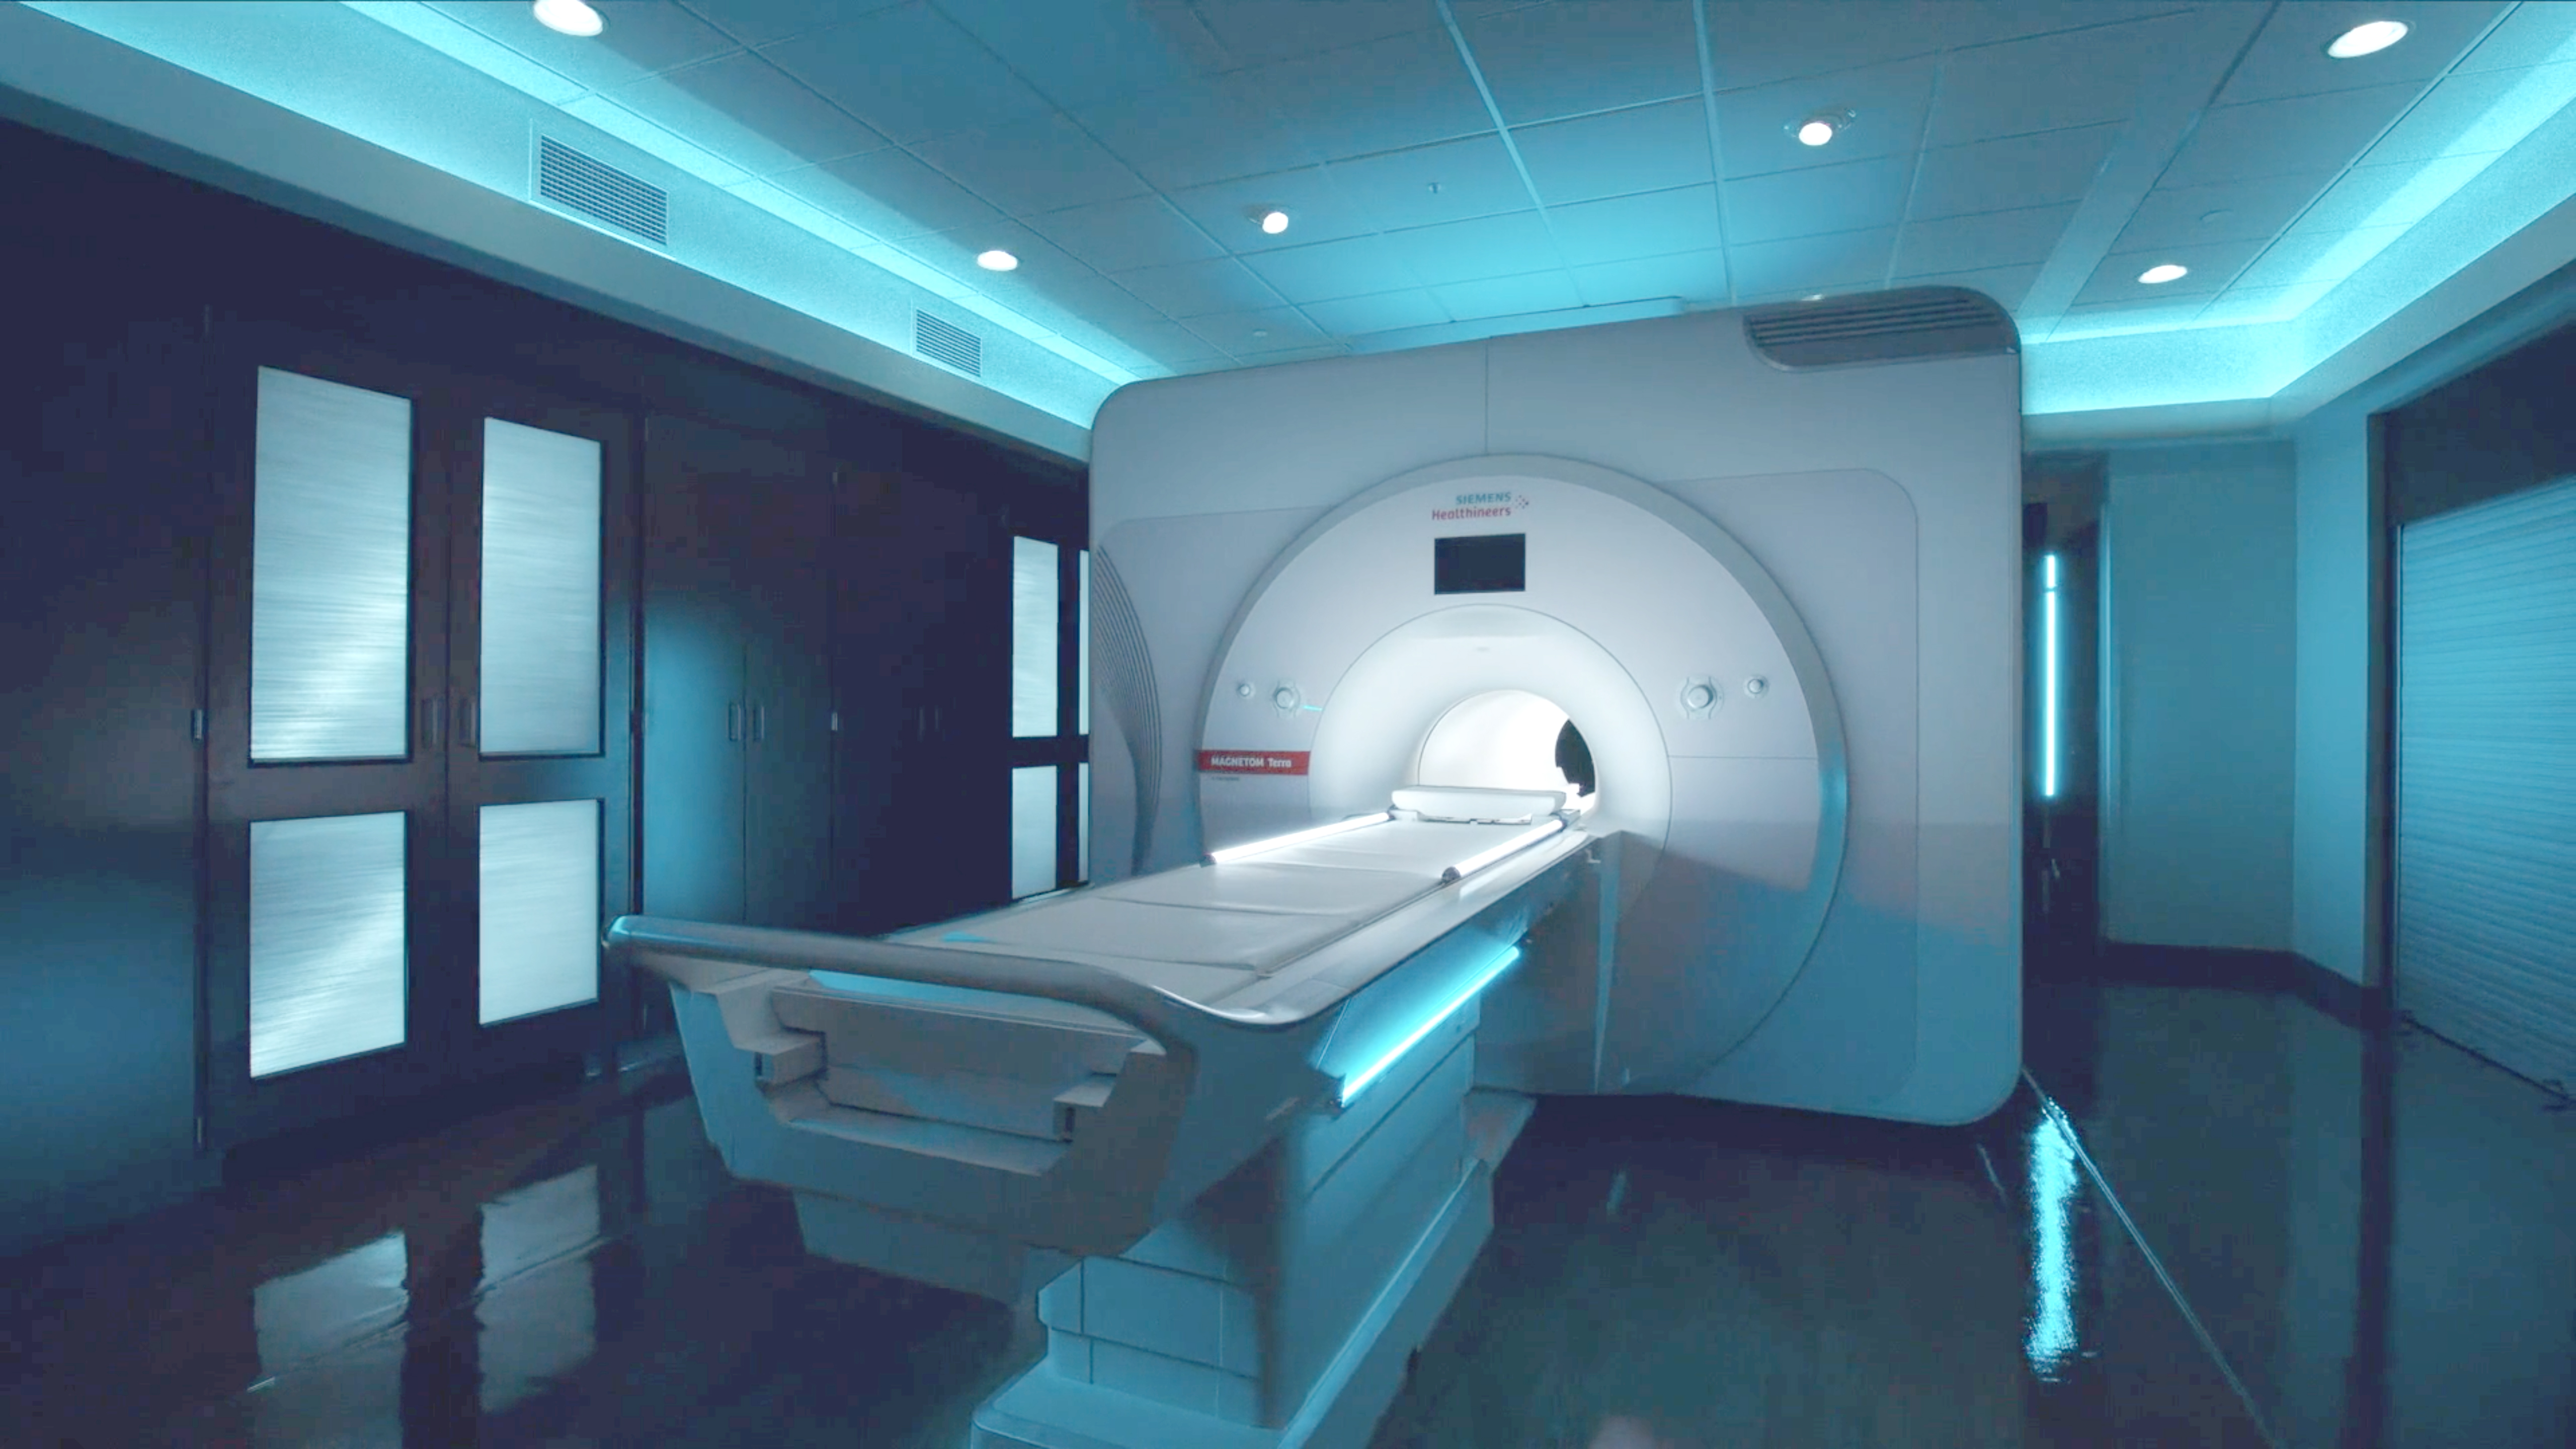 Image 2: The 7 Tesla MRI scanner co-owned and operated by UIUC and Carle in the Carle Illinois Advanced Imaging Center in Urbana.